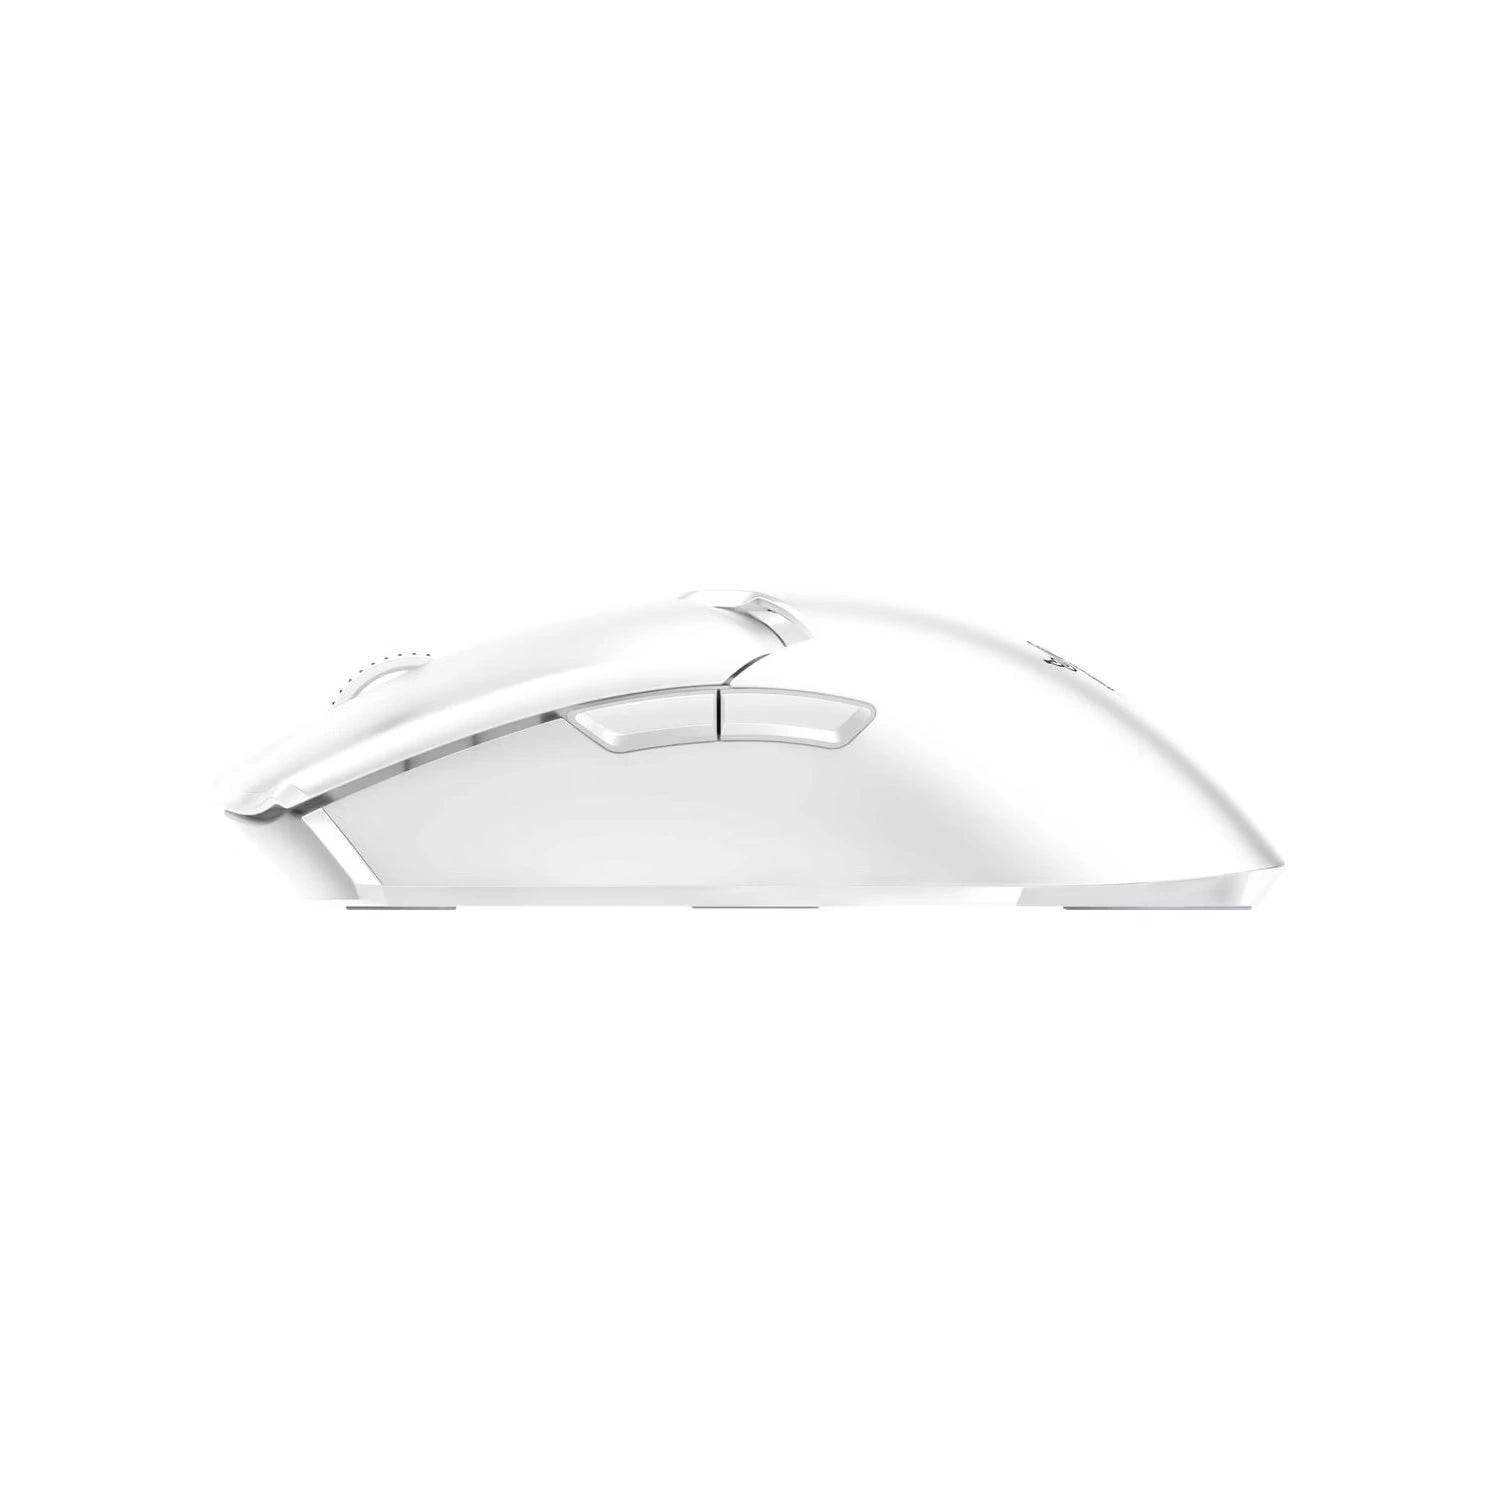 Razer Viper V2 Pro Hyperspeed Wireless Optical Gaming Mouse - White in Qatar